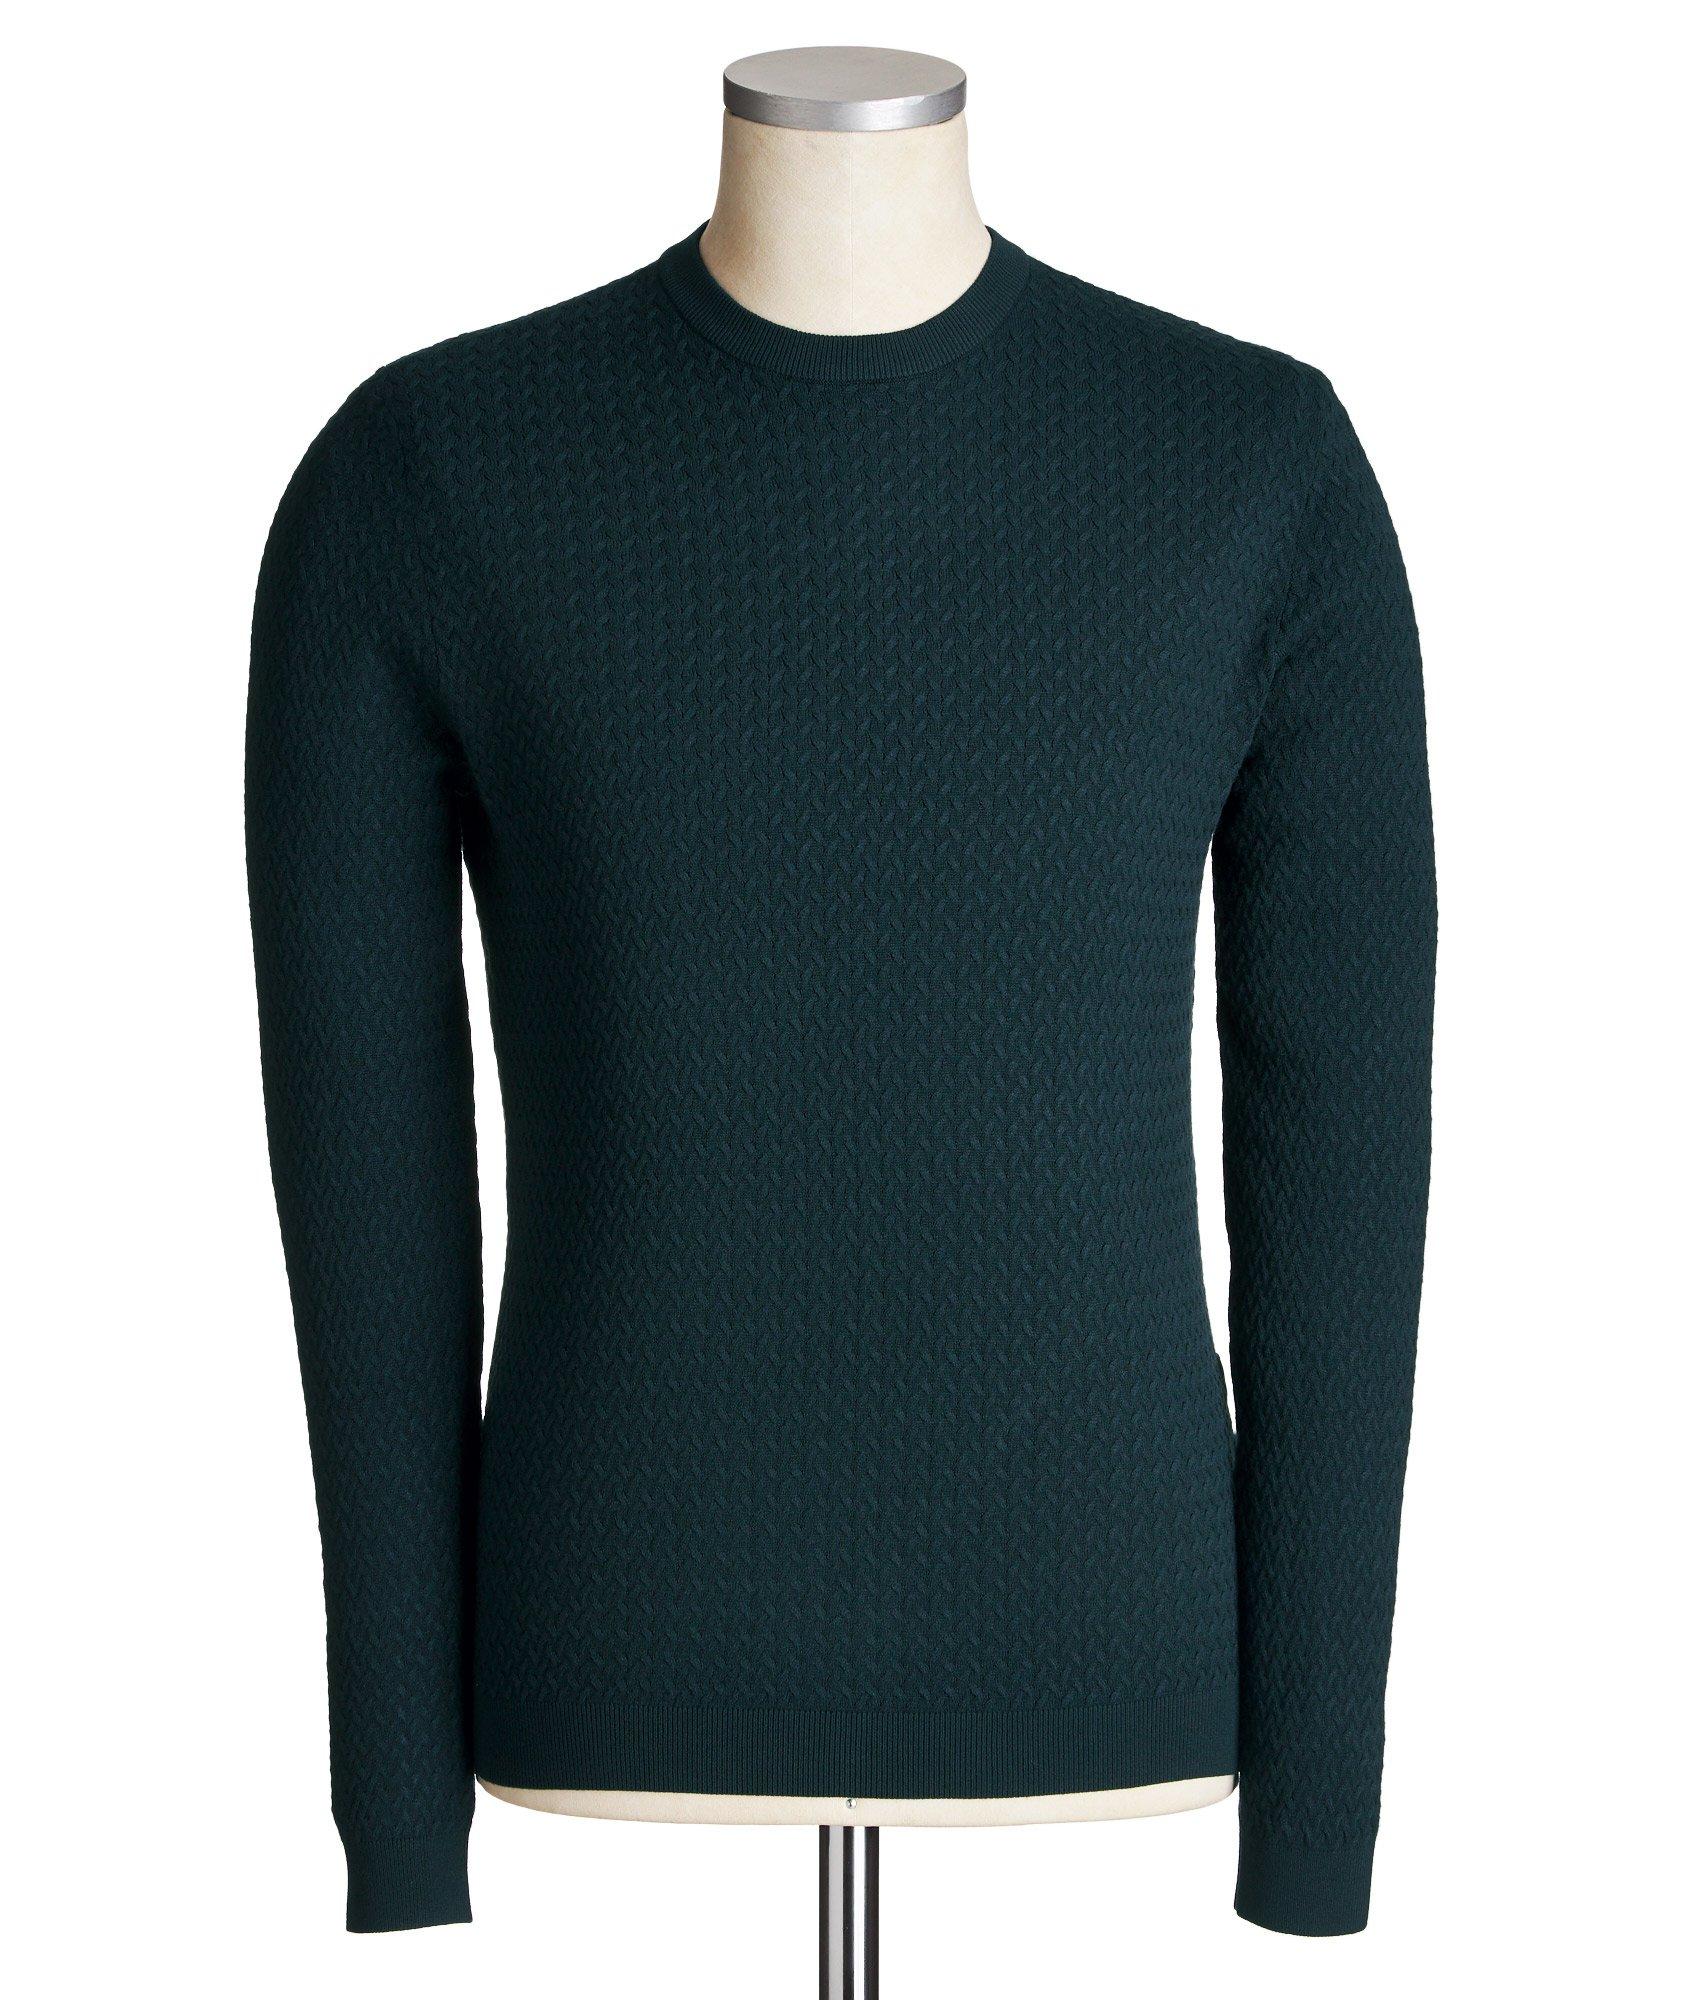 Textured Stretch-Jersey Sweater image 0